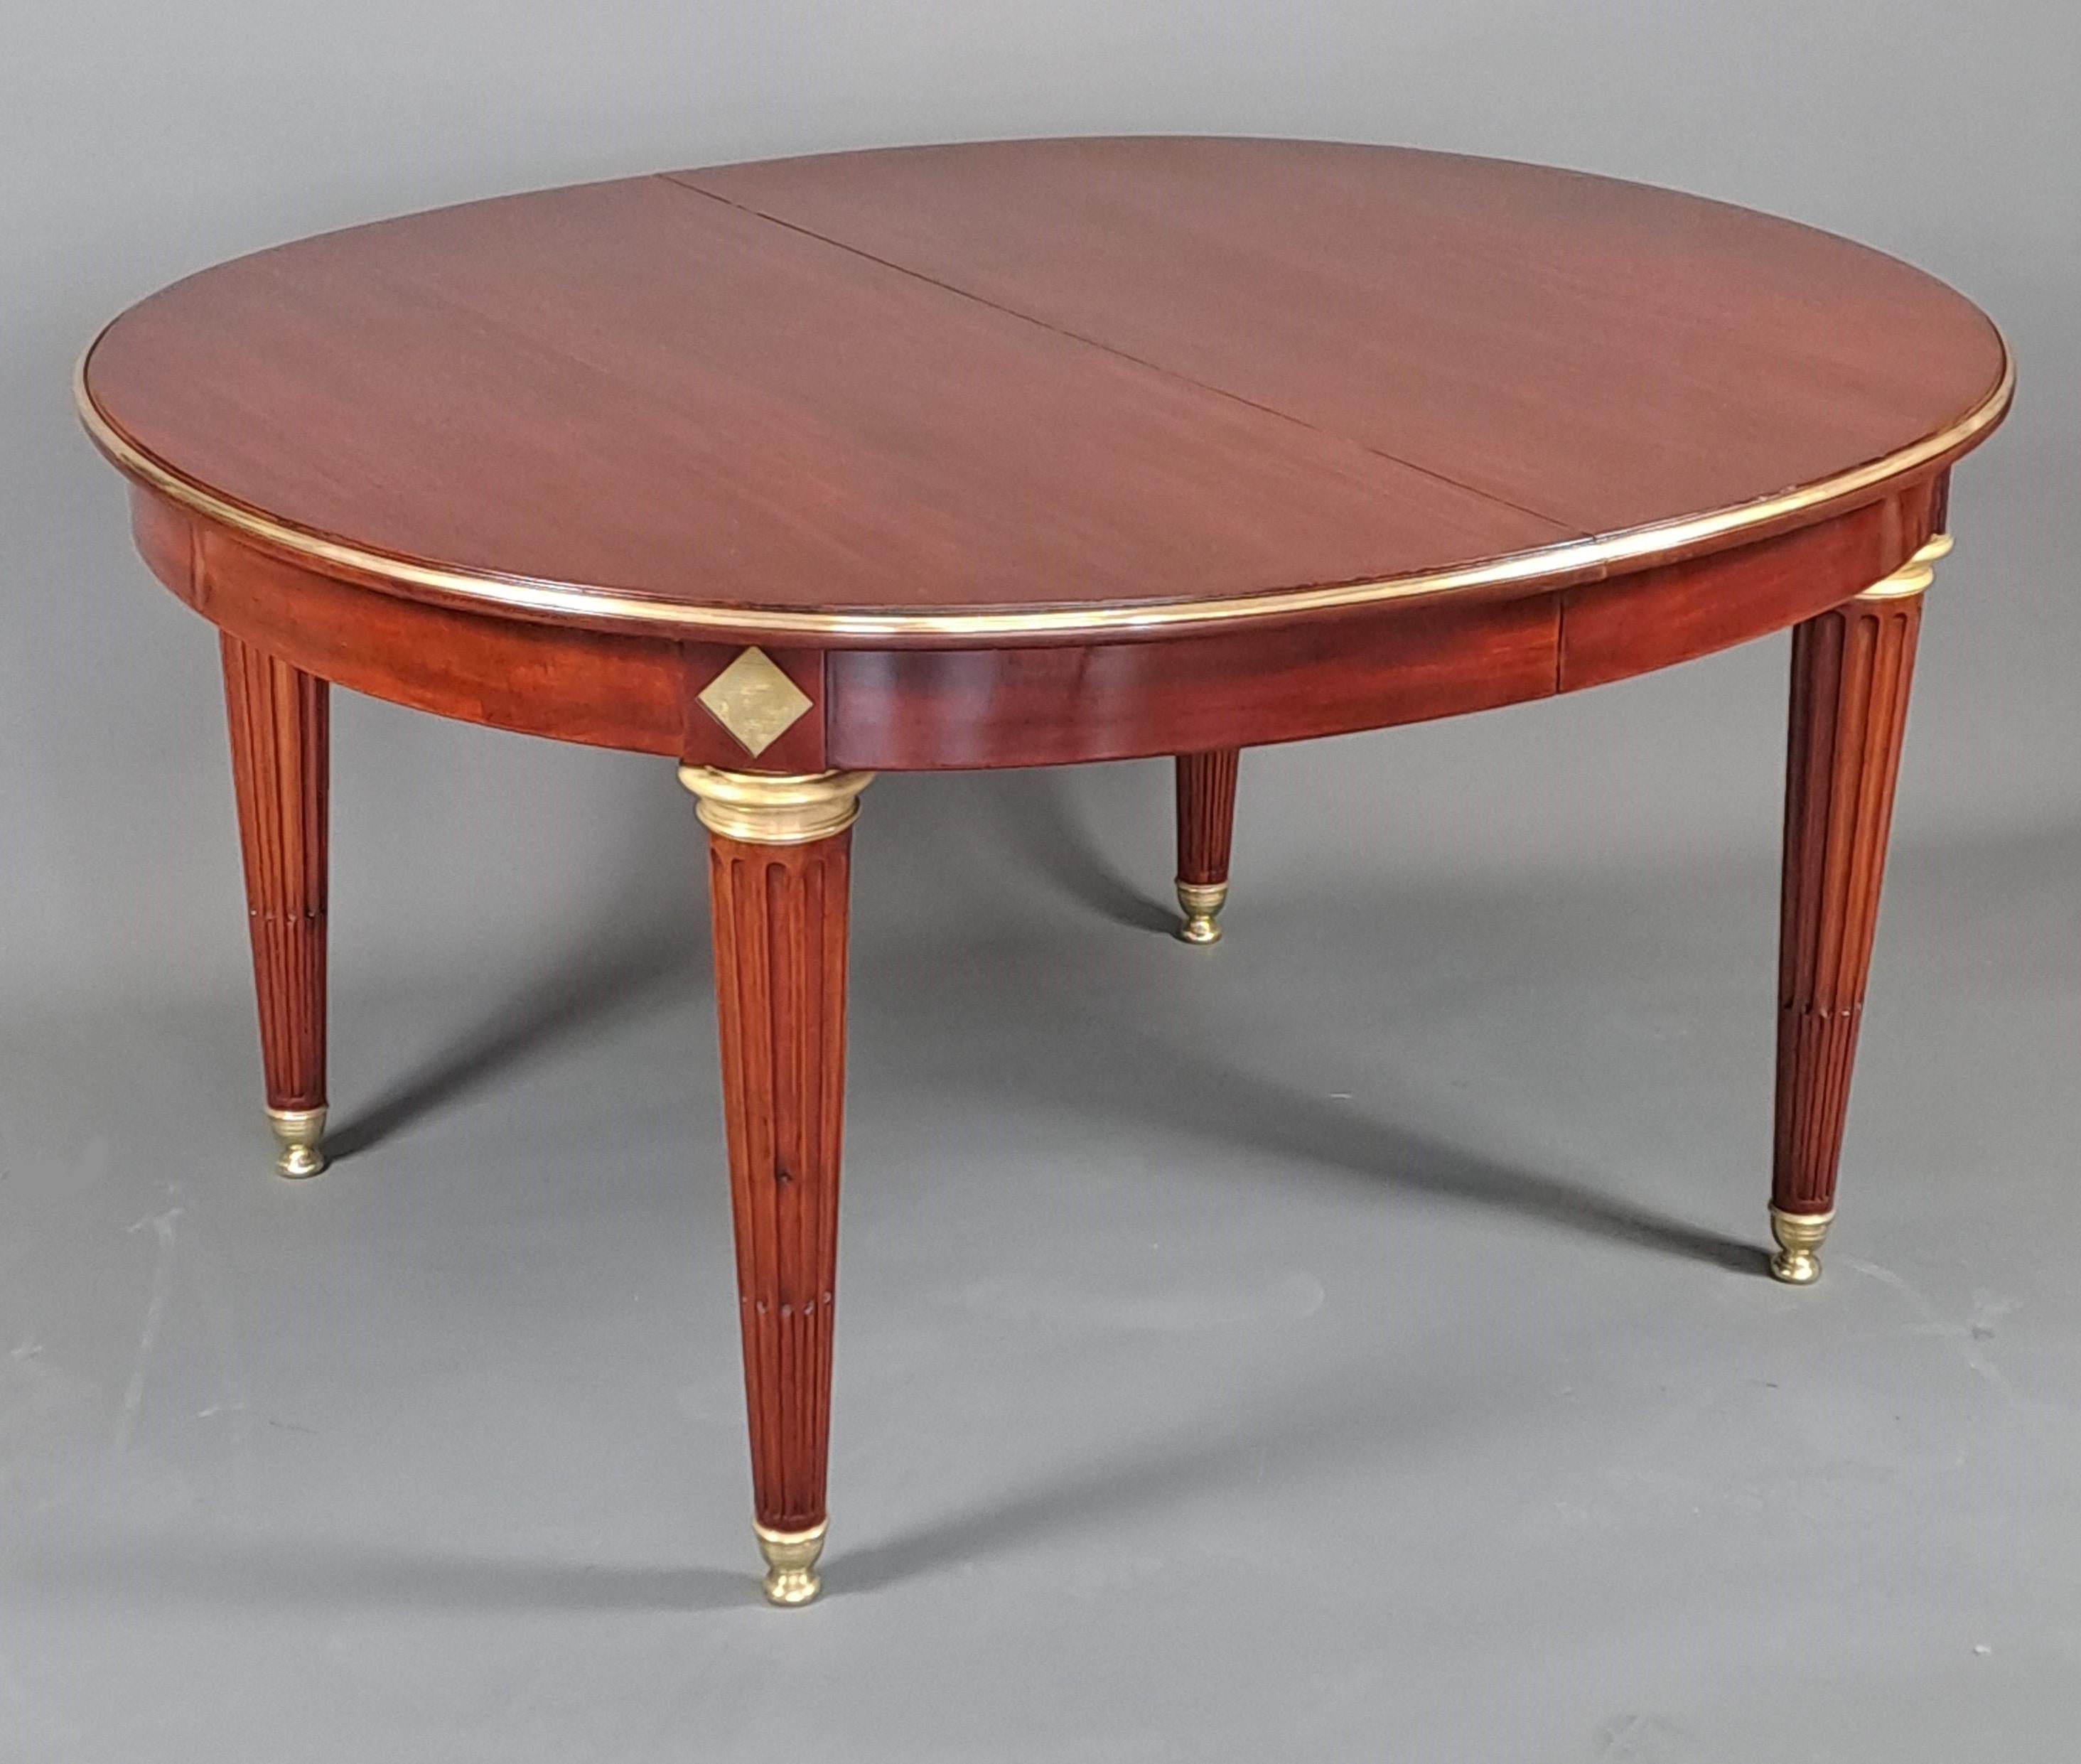 Beautiful oval table in solid mahogany and mahogany veneer in Louis XVI style. Four solid feet with rough grooves decorated with gilded bronze shoes and rings. On the headband we find diamond-shaped scrapers above each foot. The oval tray is